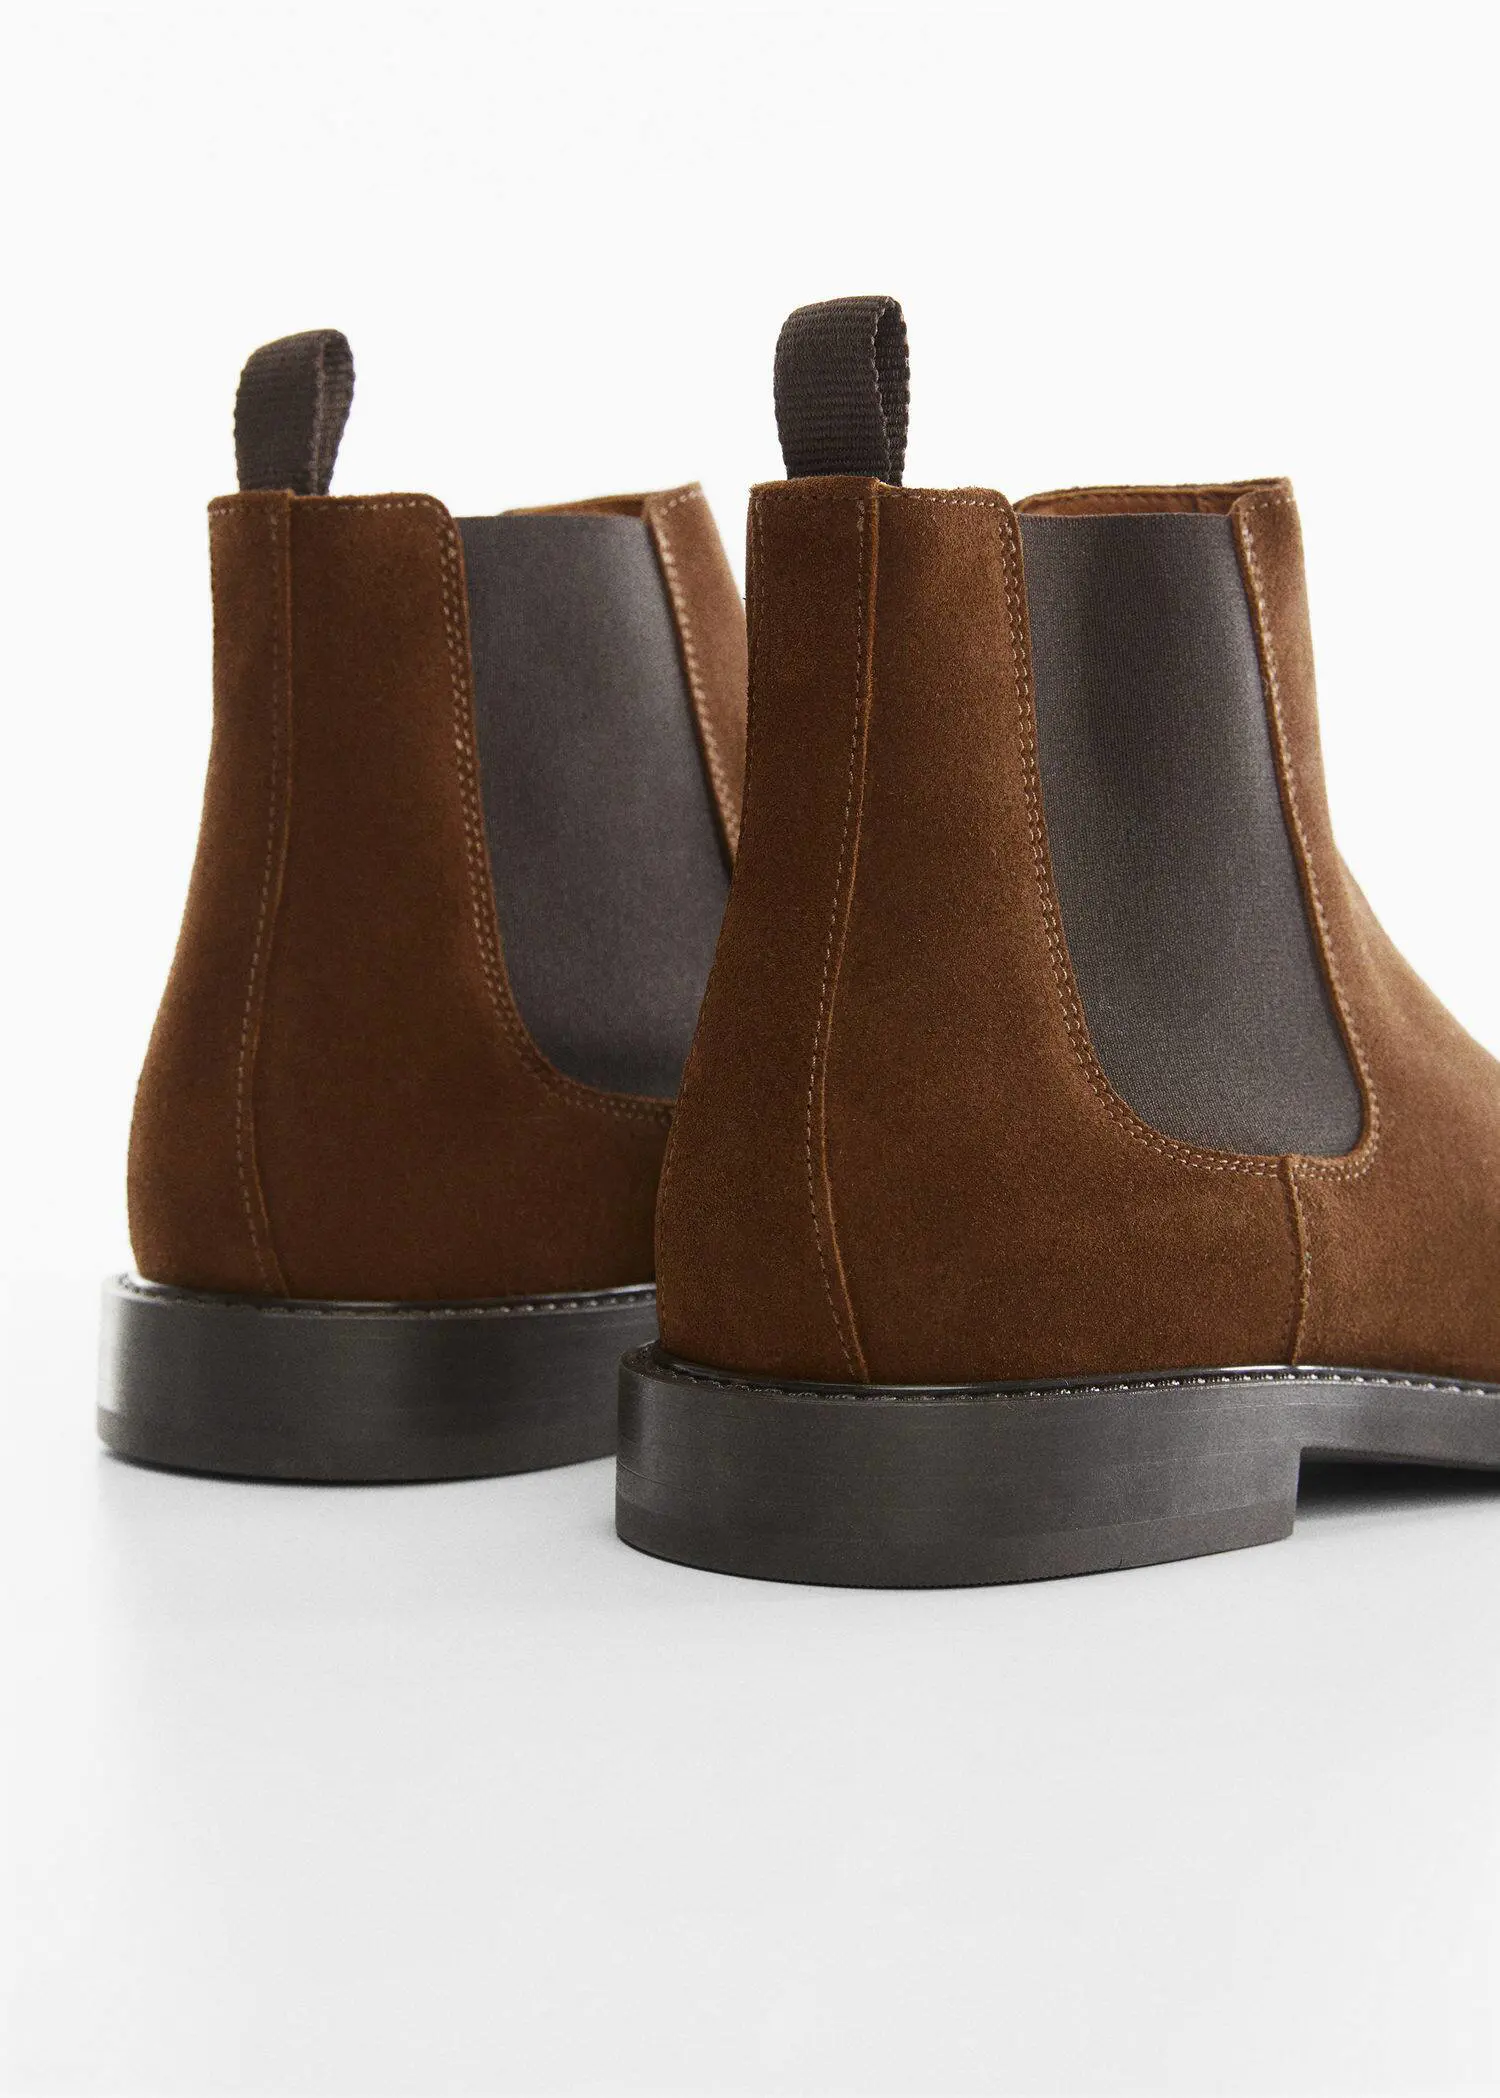 Mango Suede Chelsea ankle boots. 2